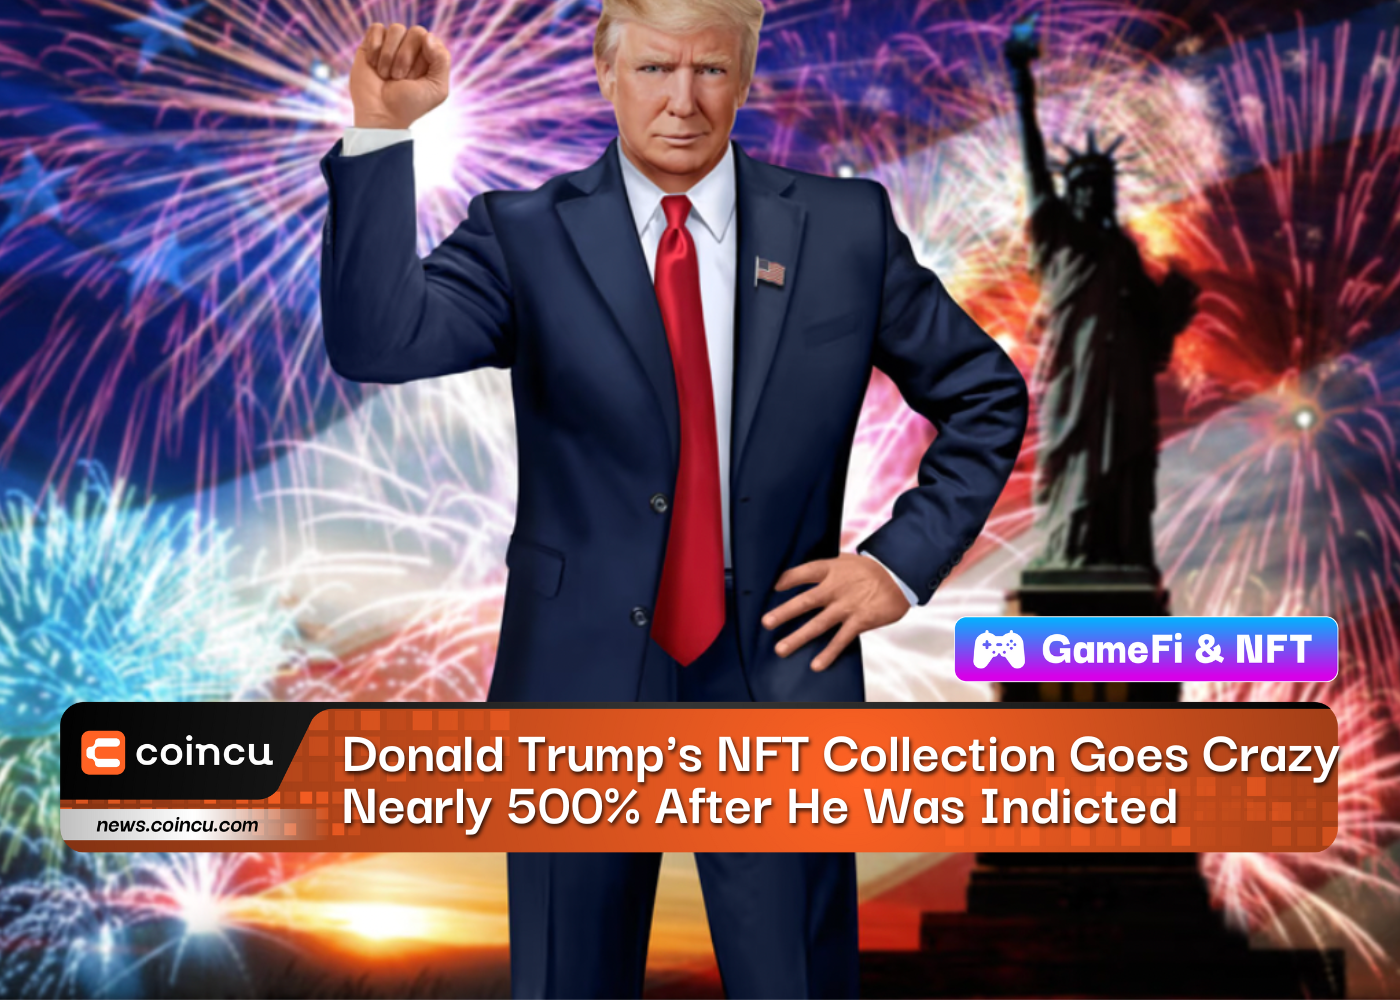 Donald Trump's NFT Collection Goes Crazy Nearly 500% After He Was Indicted